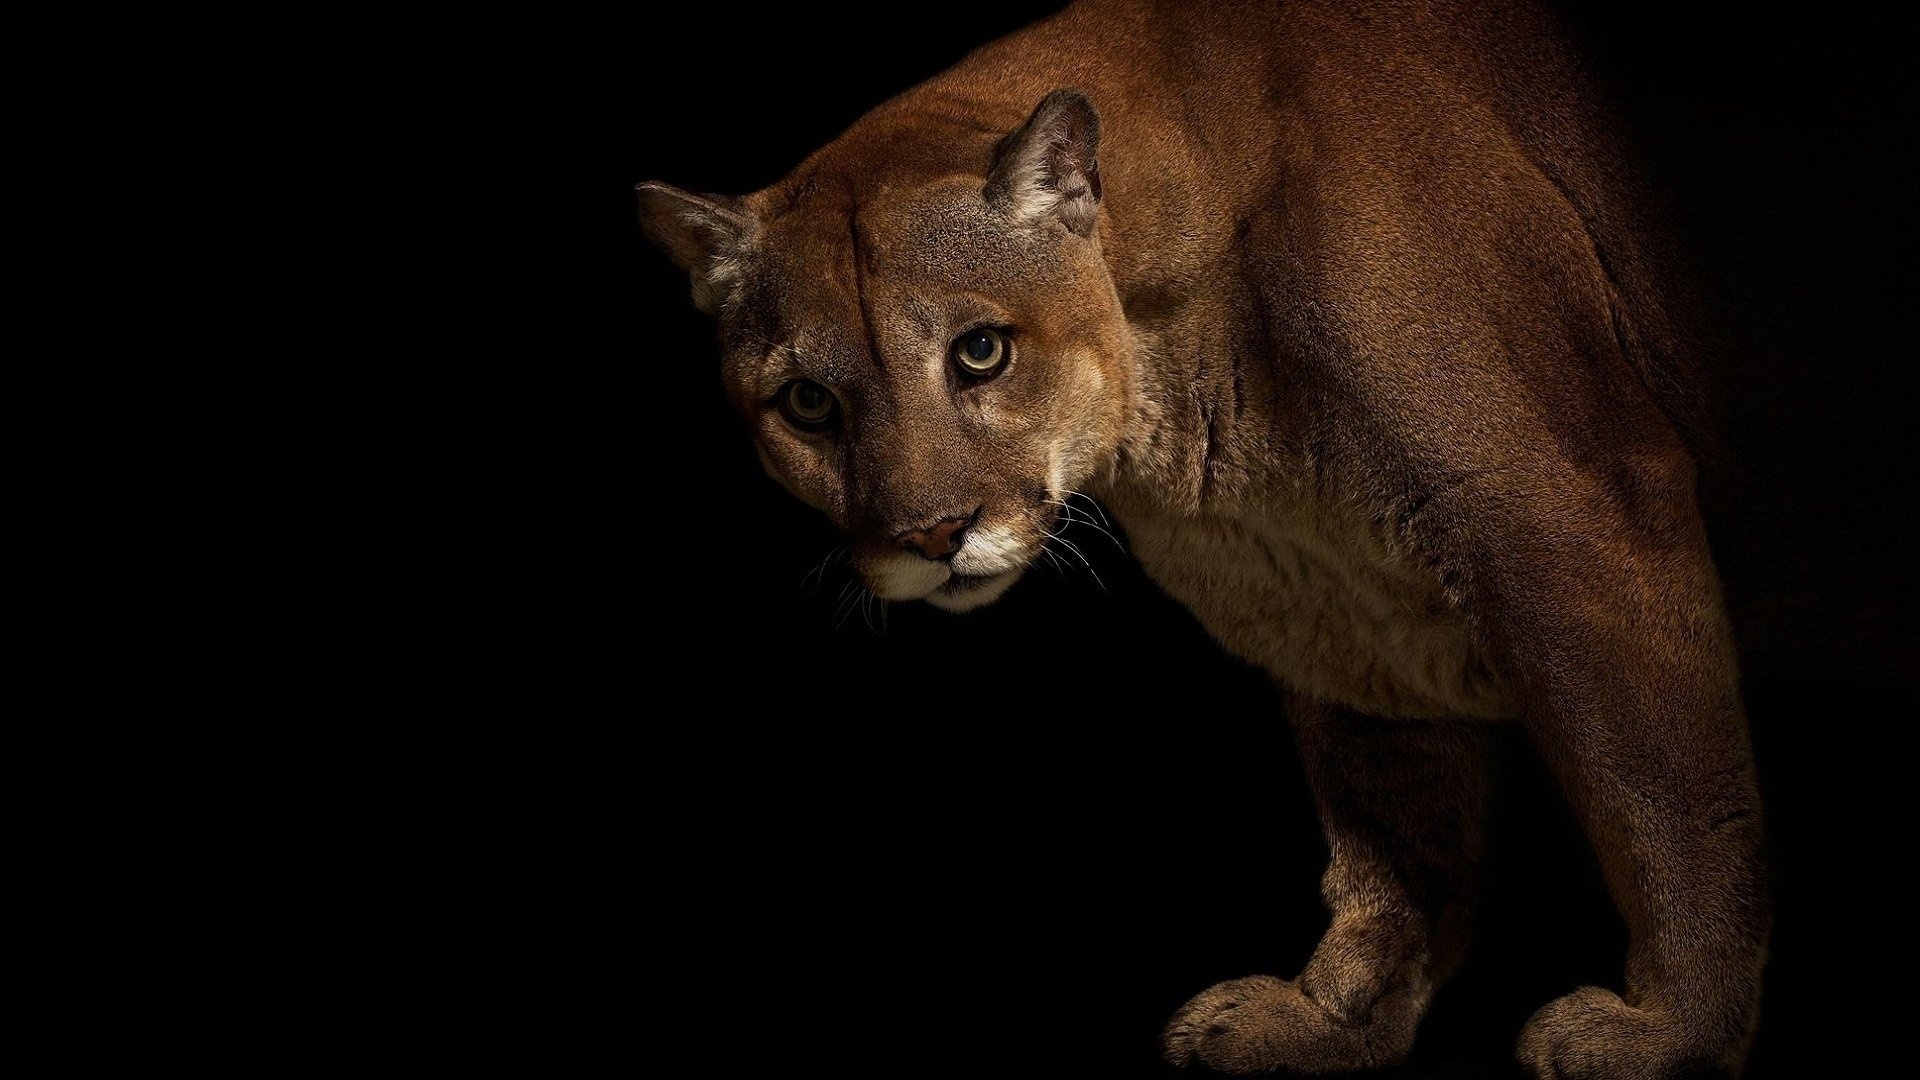 Cougar in HD, Captivating image, Nature's masterpiece, Powerful grace, 1920x1080 Full HD Desktop